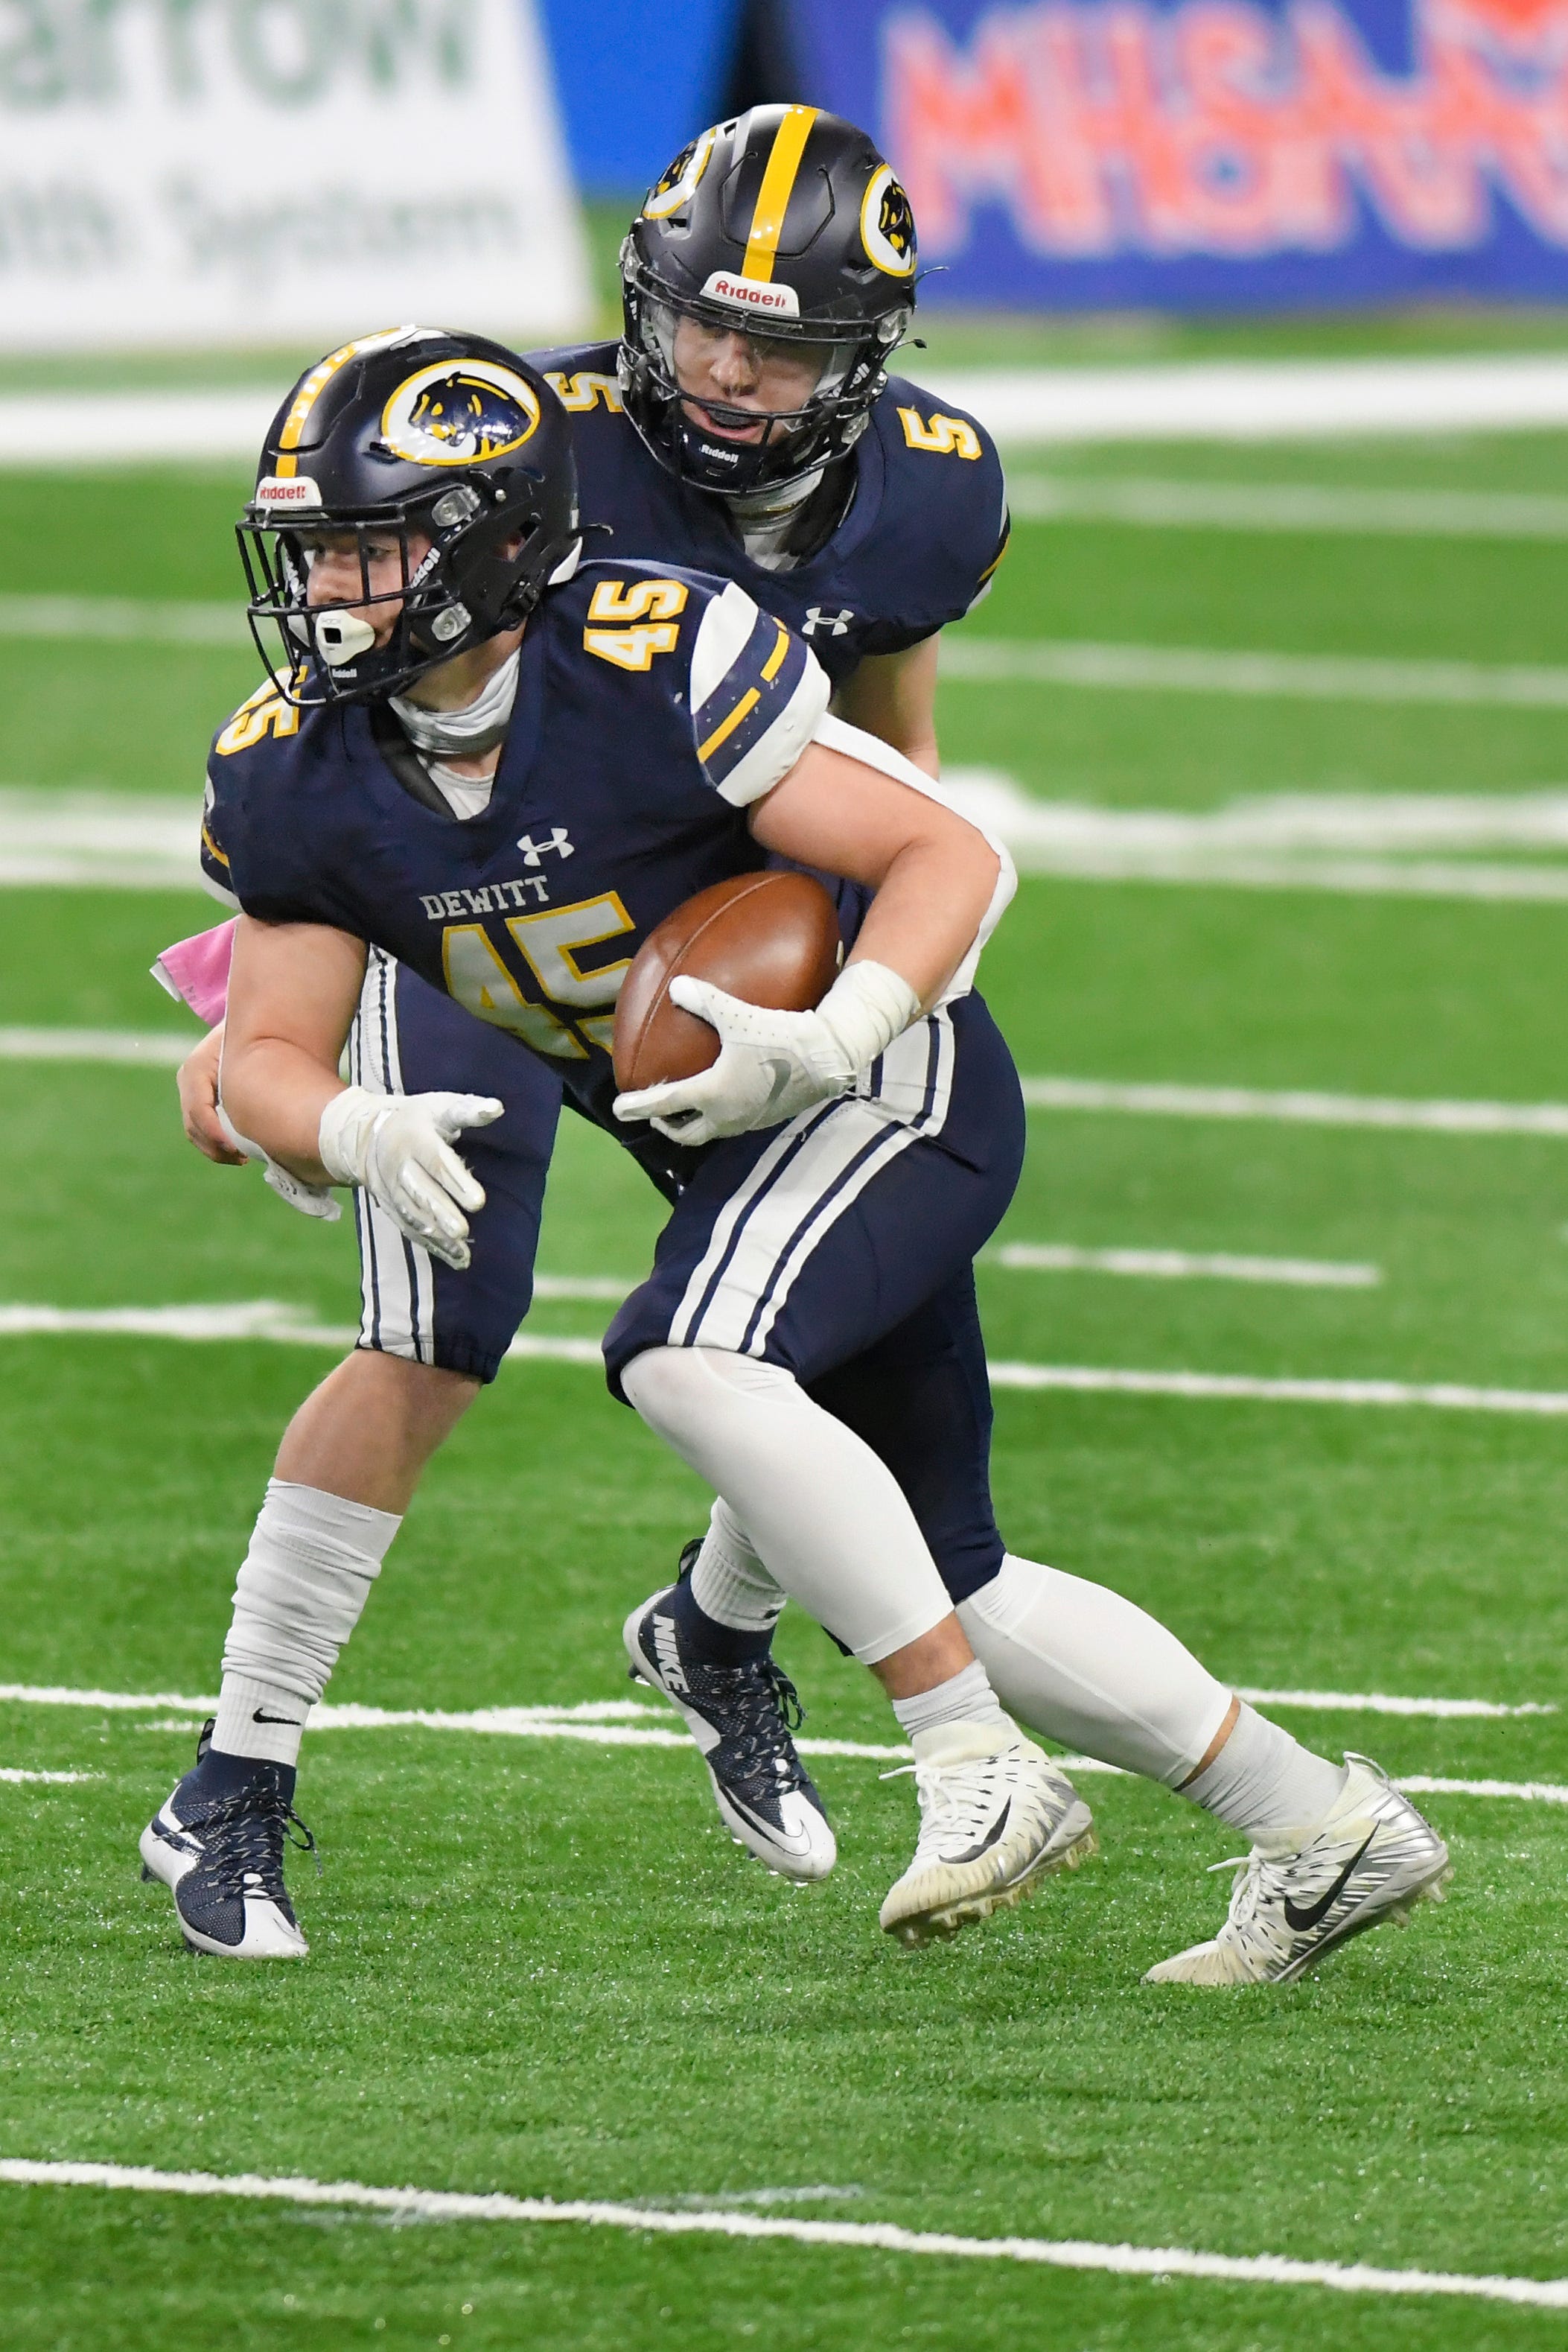 DeWitt running back Andrew Debri rushes against River Rouge in the first quarter of a Division 3 football final.